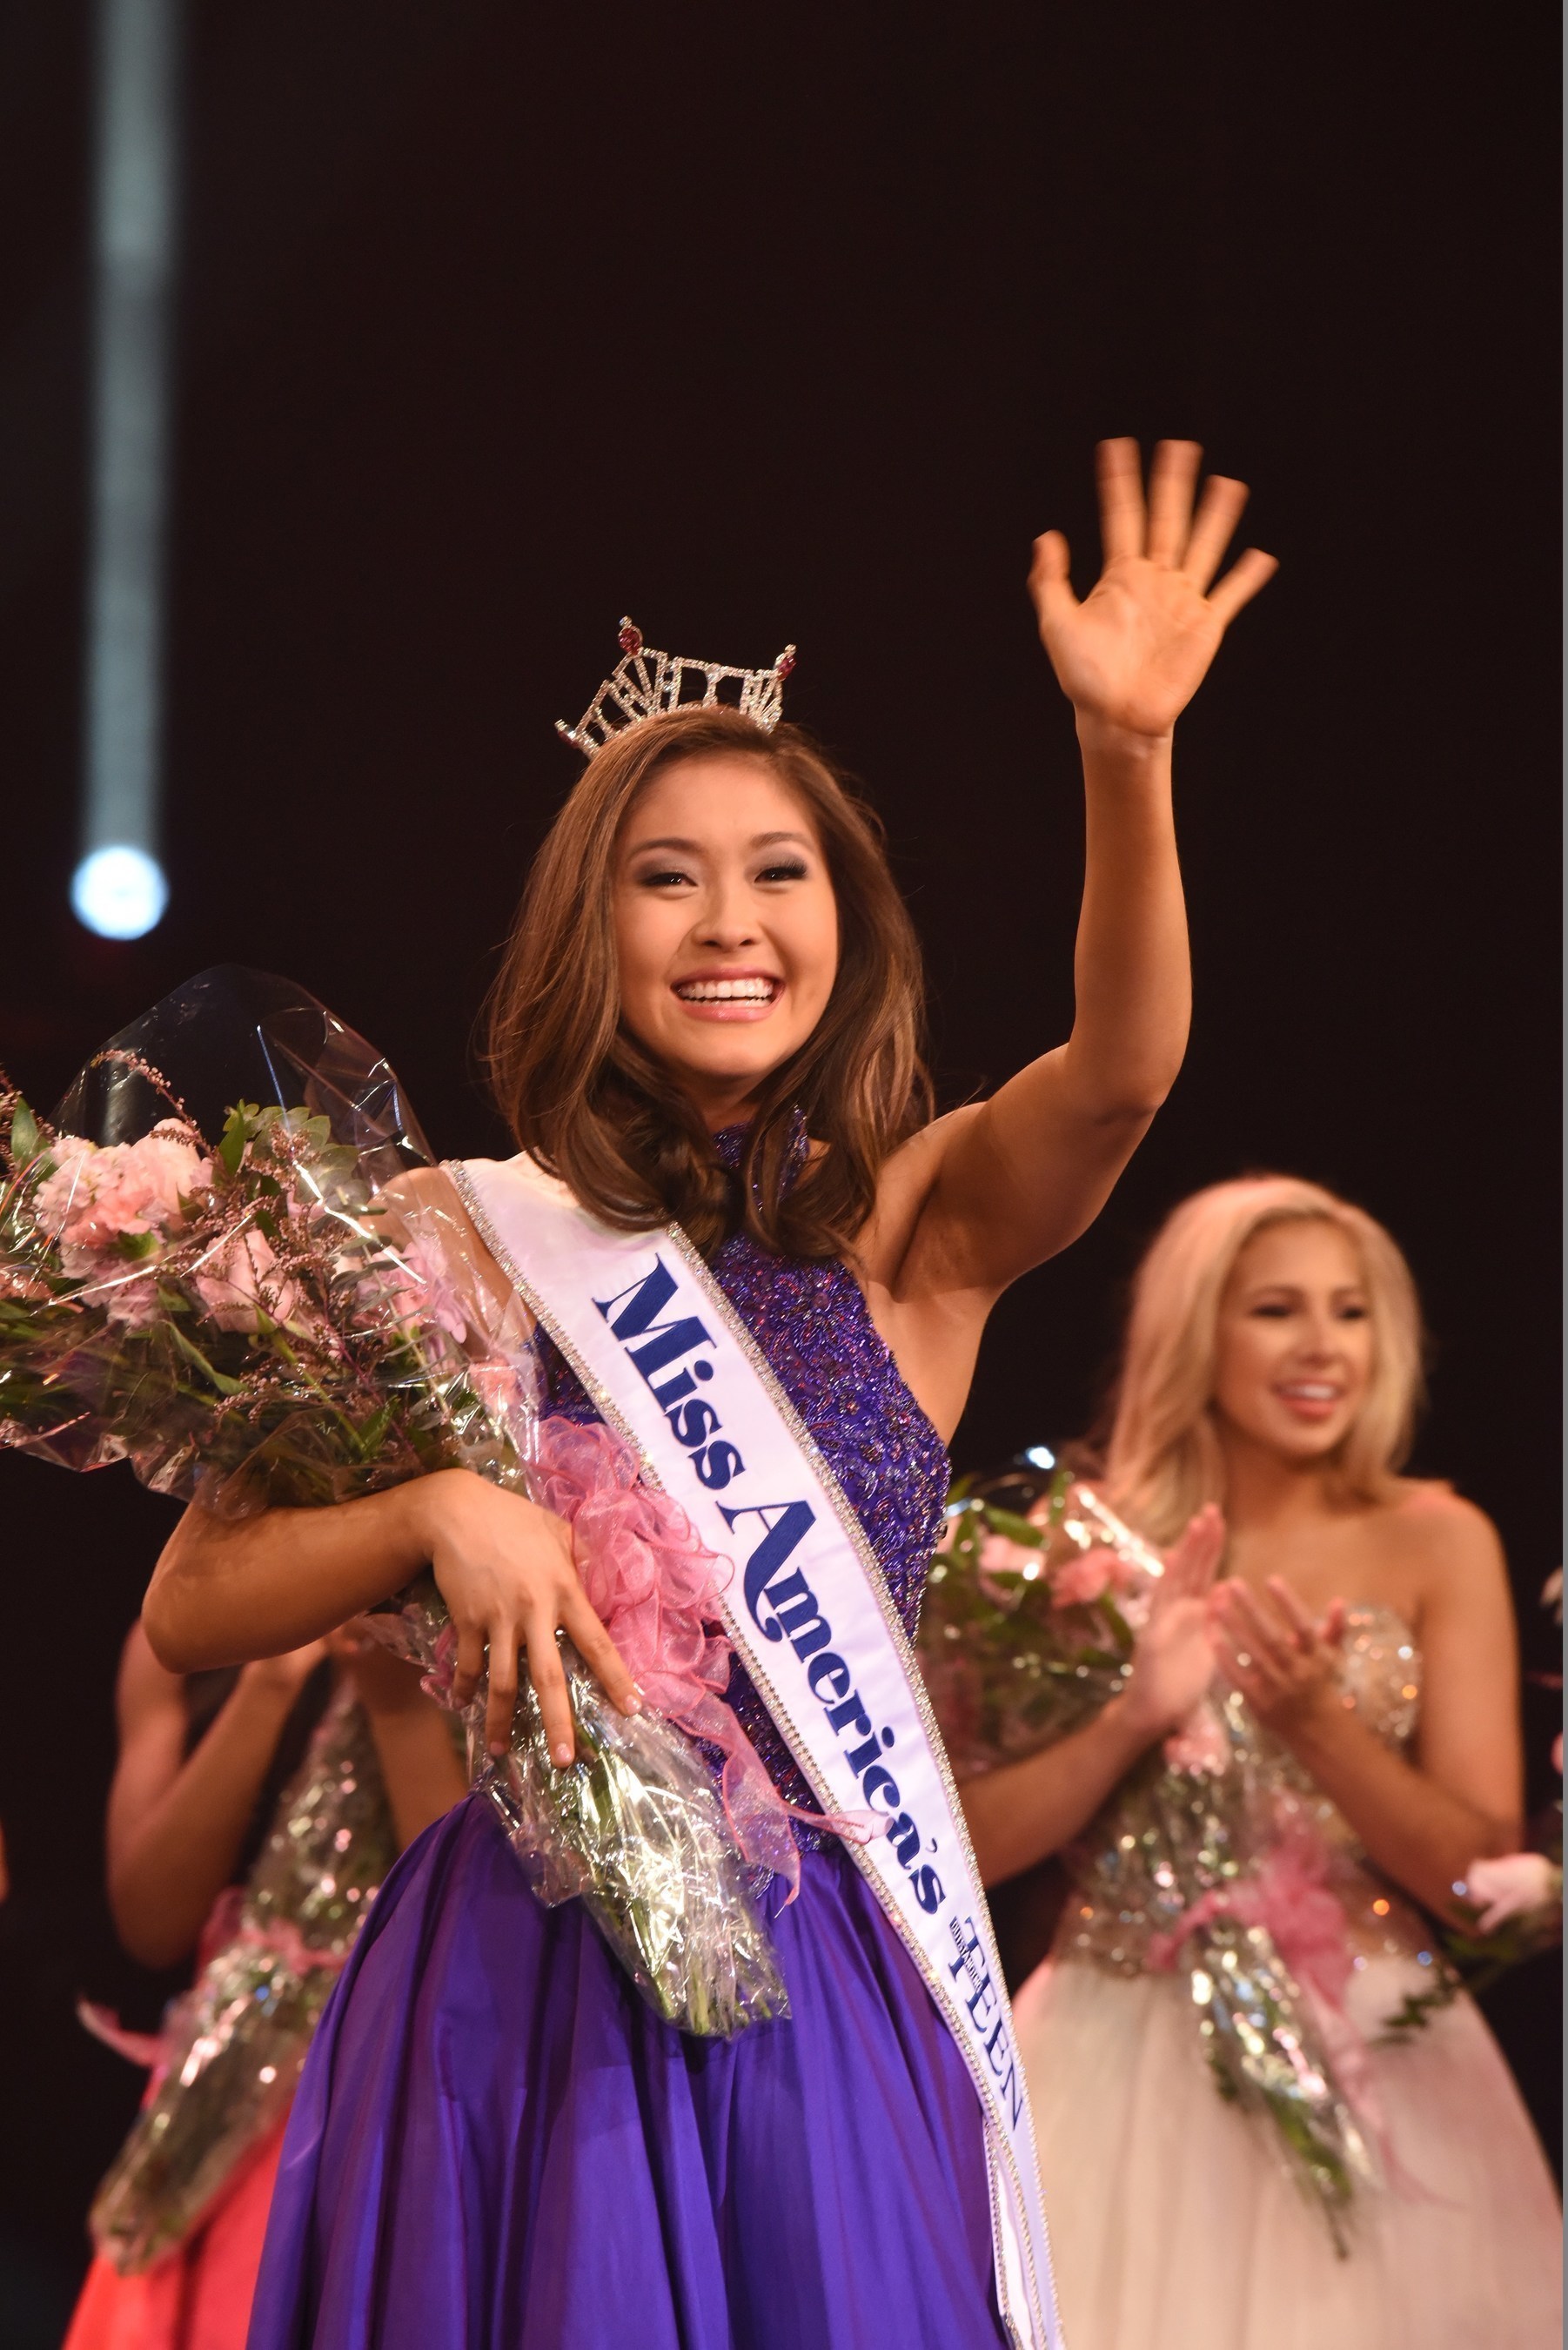 Miss America's Outstanding Teen 2017 Nicole Jia takes her first walk and waves to the crowd after being crowned at the Linda Chapin Theater inside the Orange County Convention Center in Orlando. www.maoteen.org